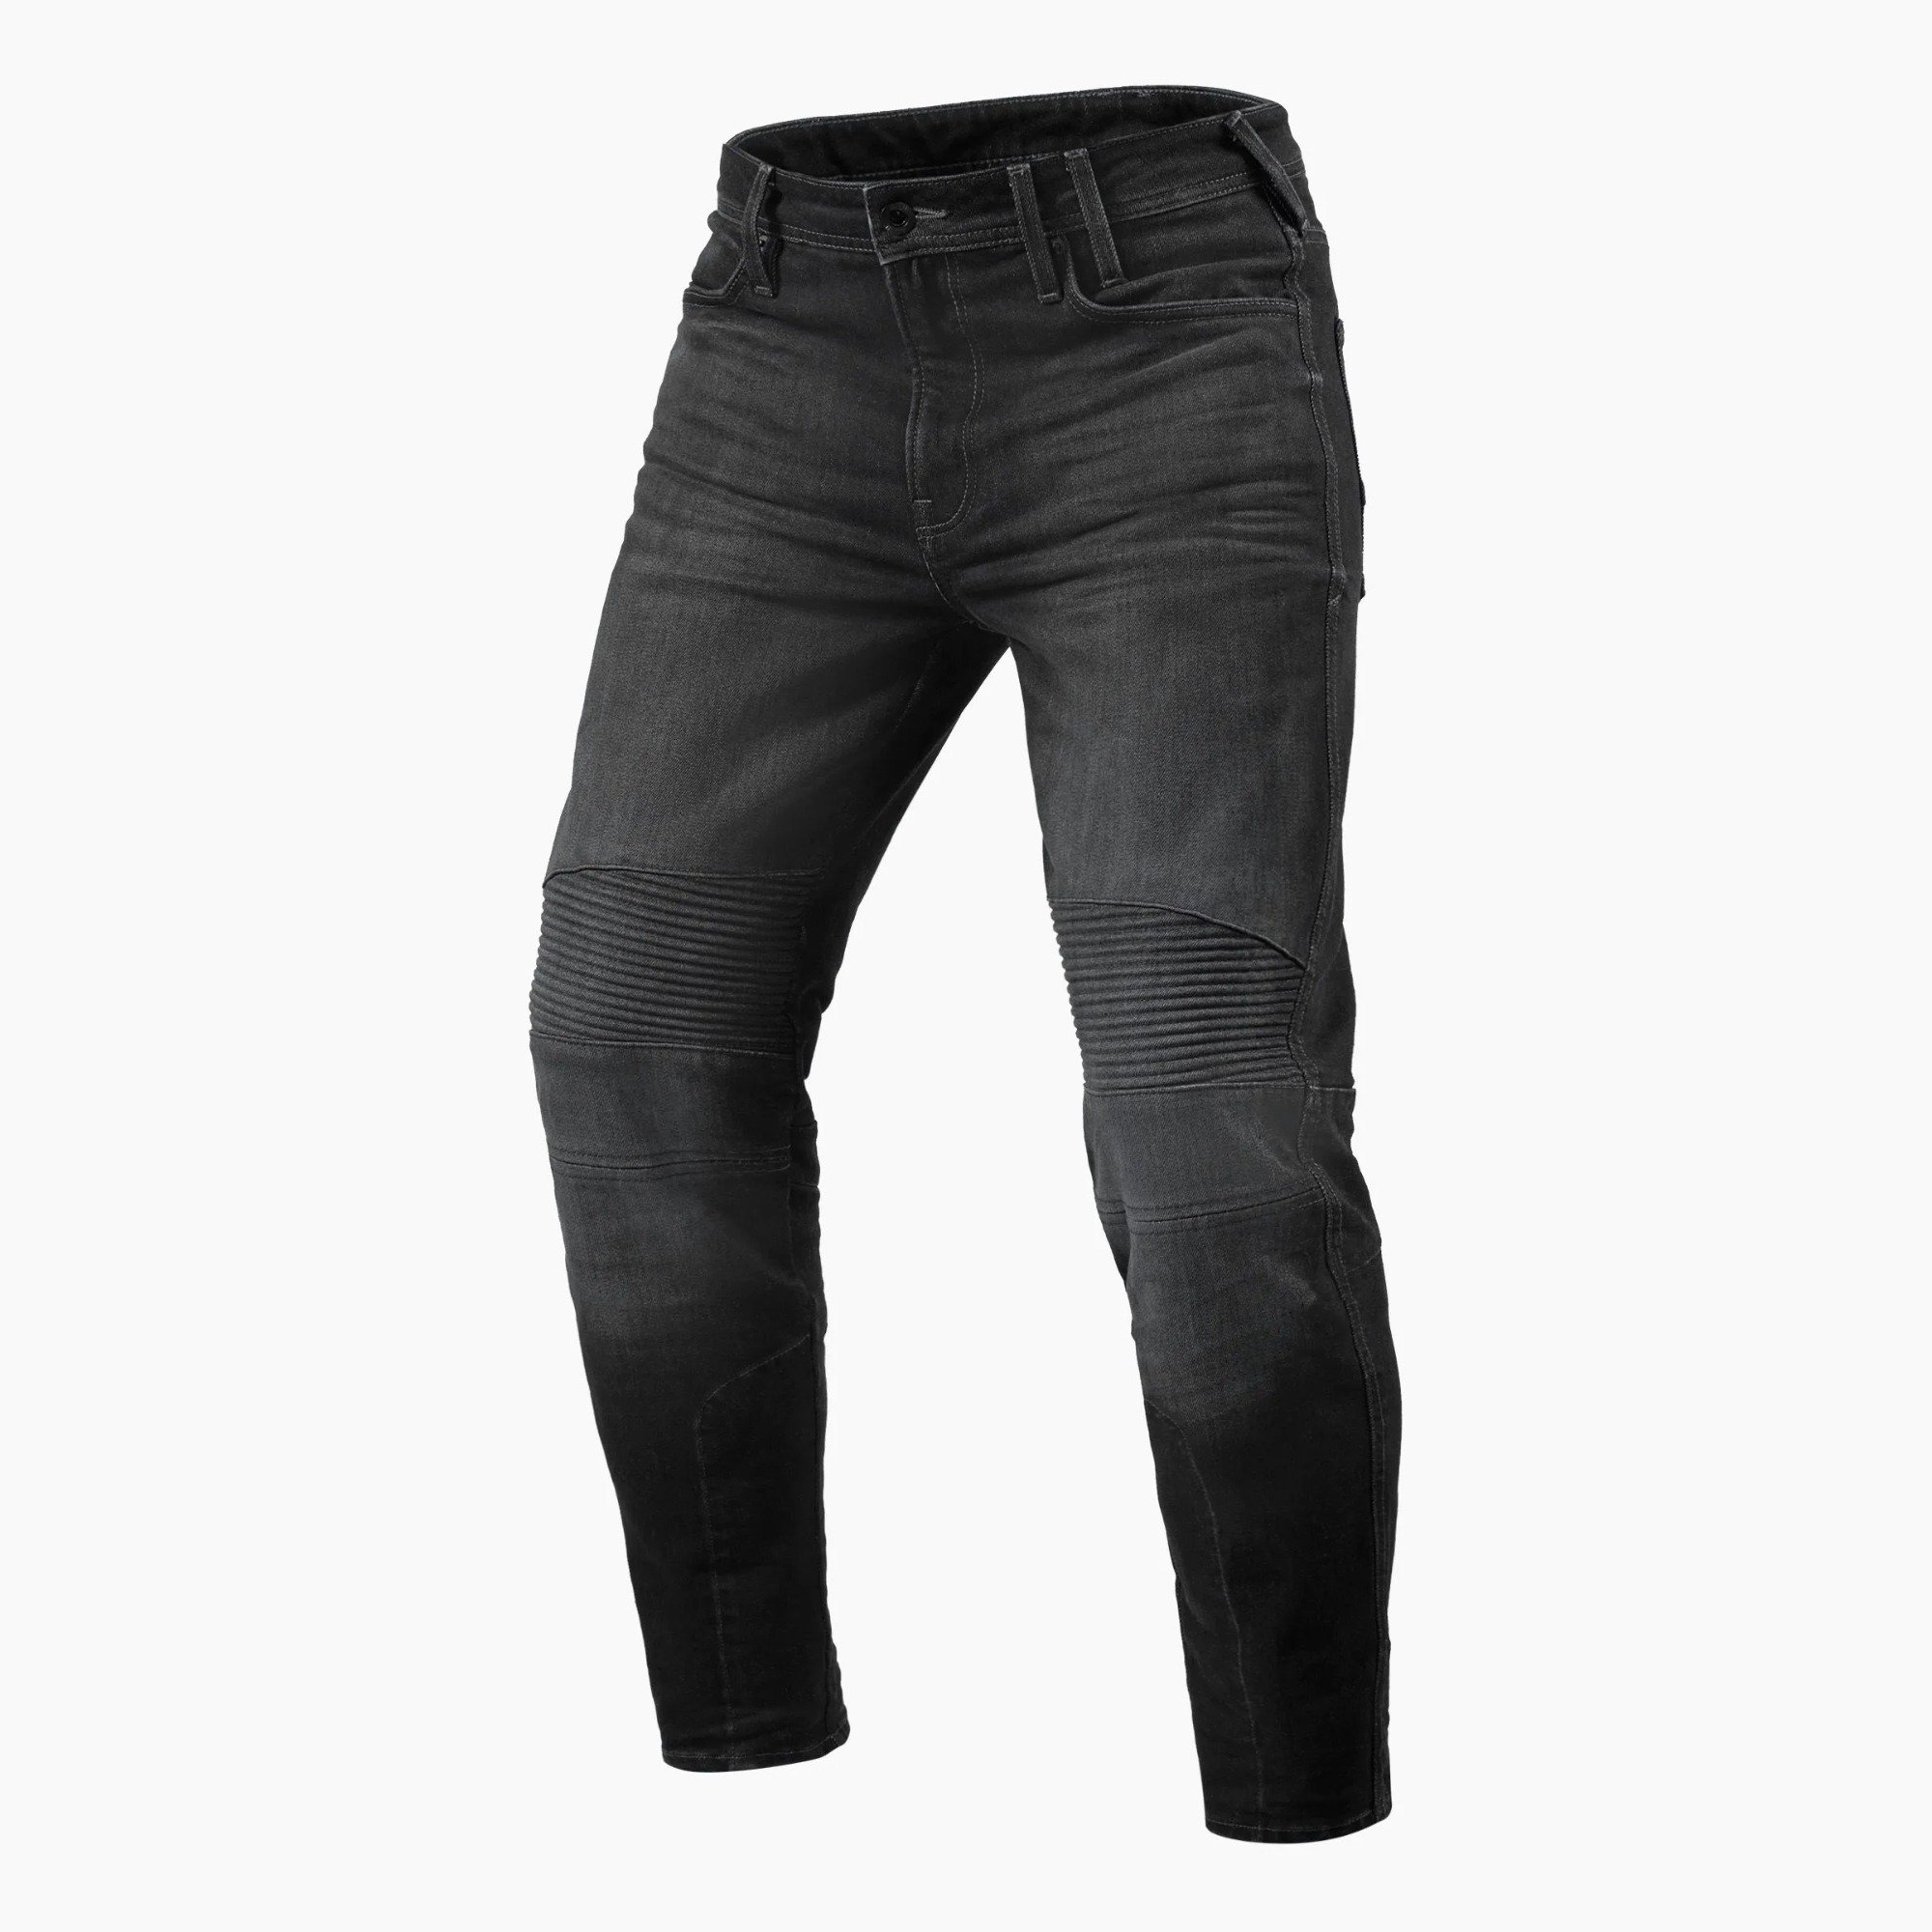 Image of REV'IT! Jeans Moto 2 TF Dark Grey Used Motorcycle Jeans Size L34/W28 ID 8700001337762